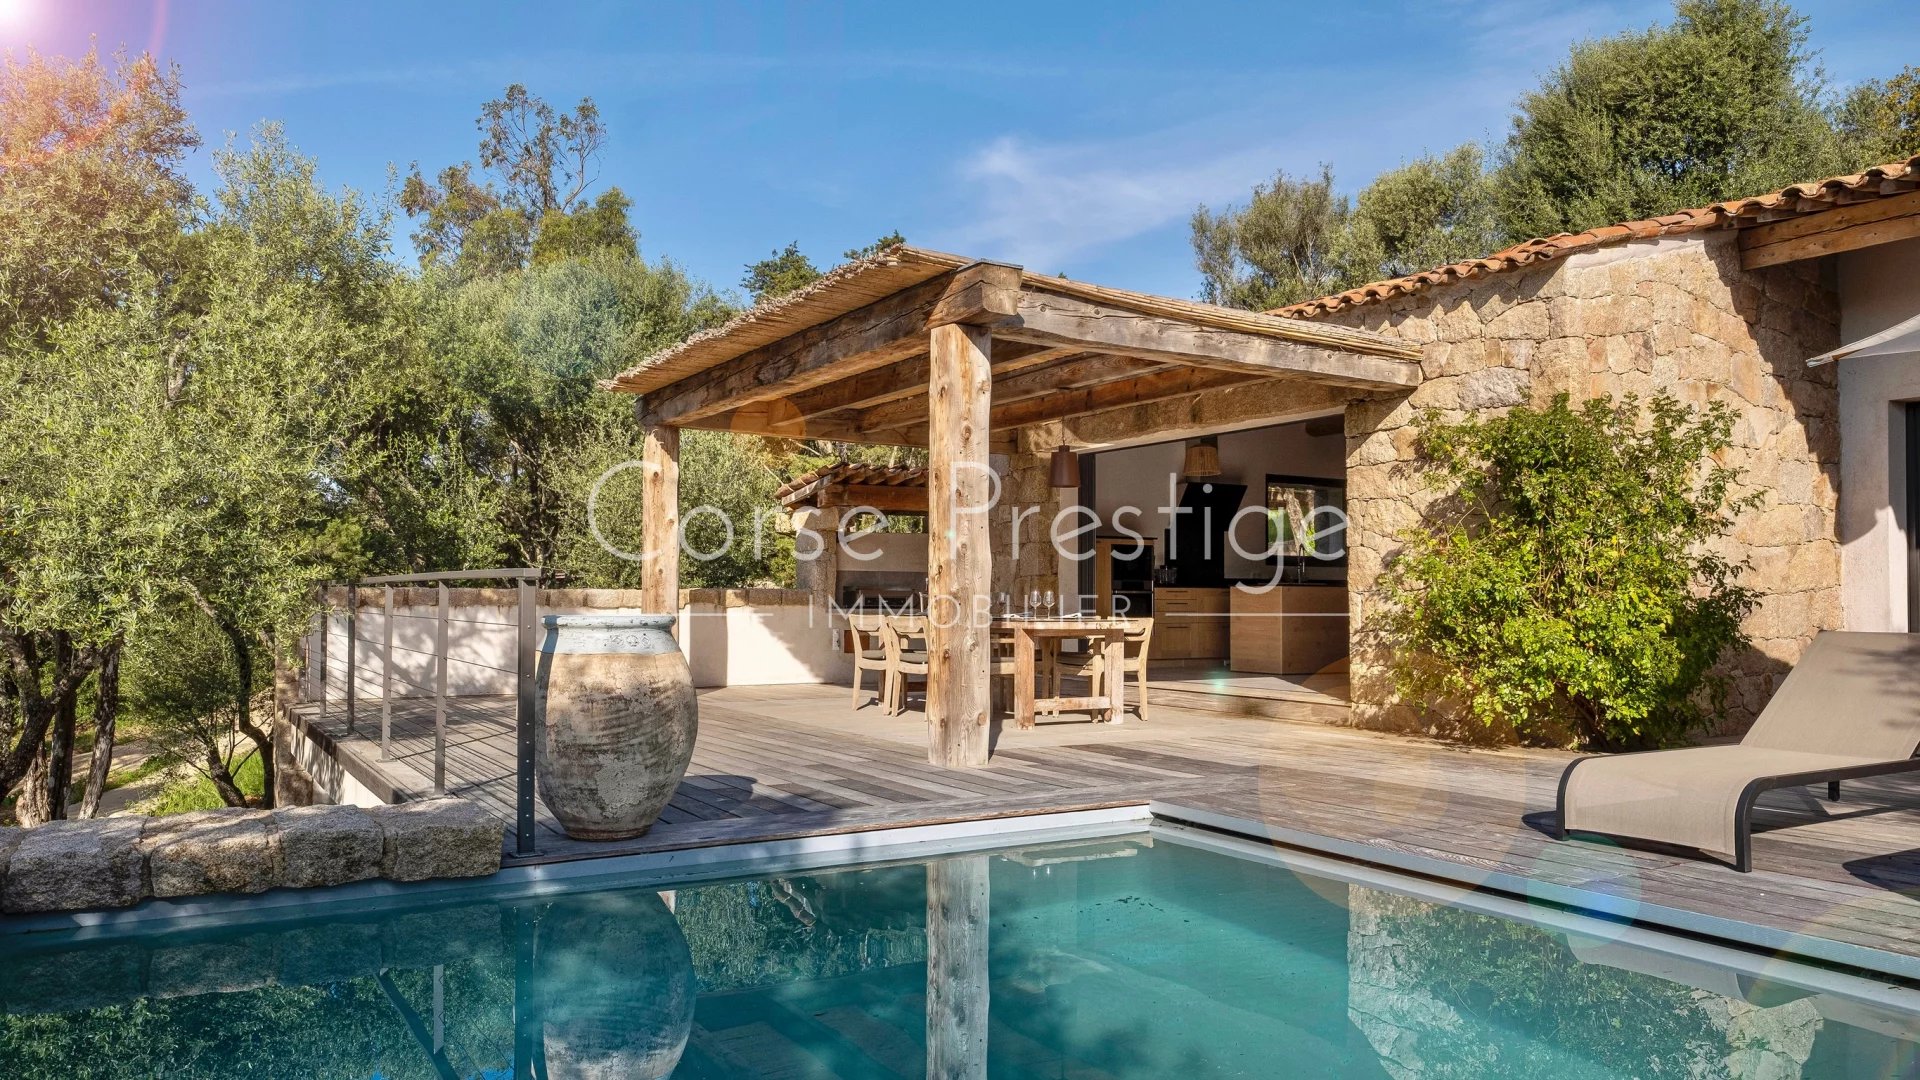 corsican farmhouse for rent by the sea image1